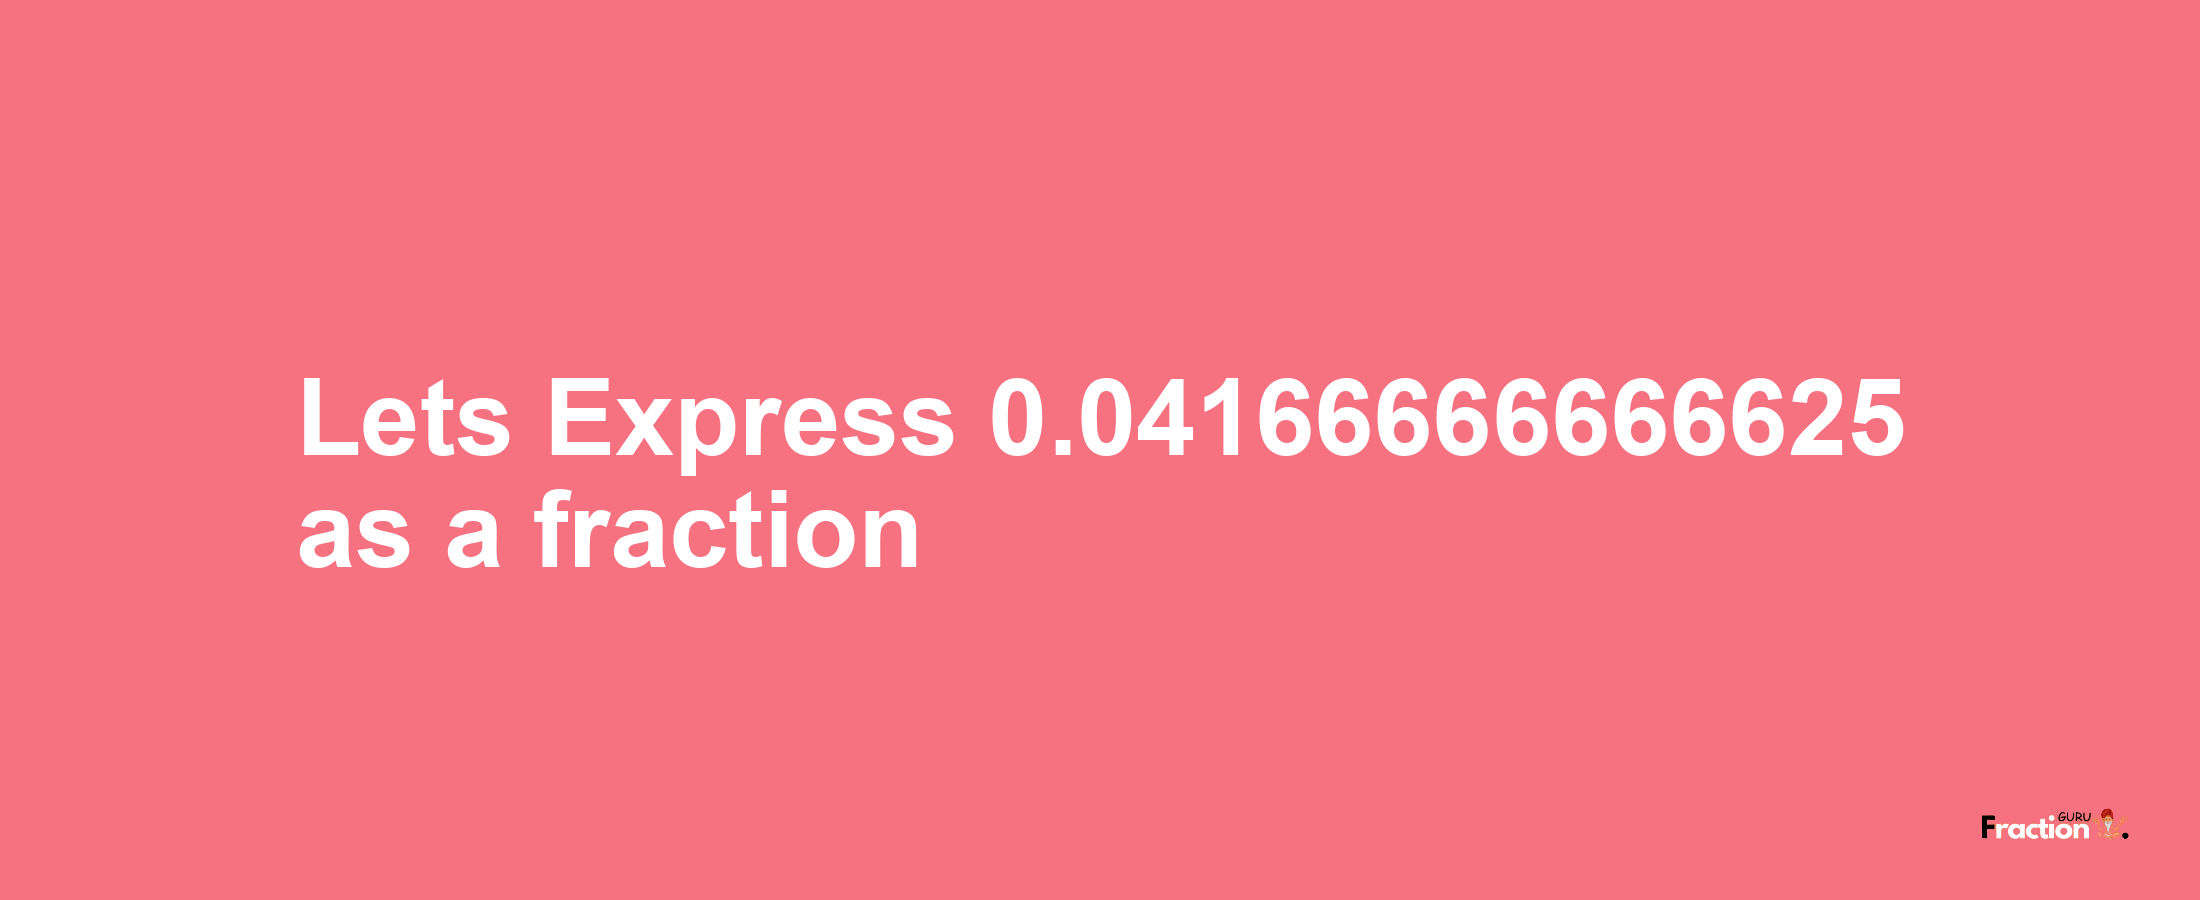 Lets Express 0.04166666666625 as afraction